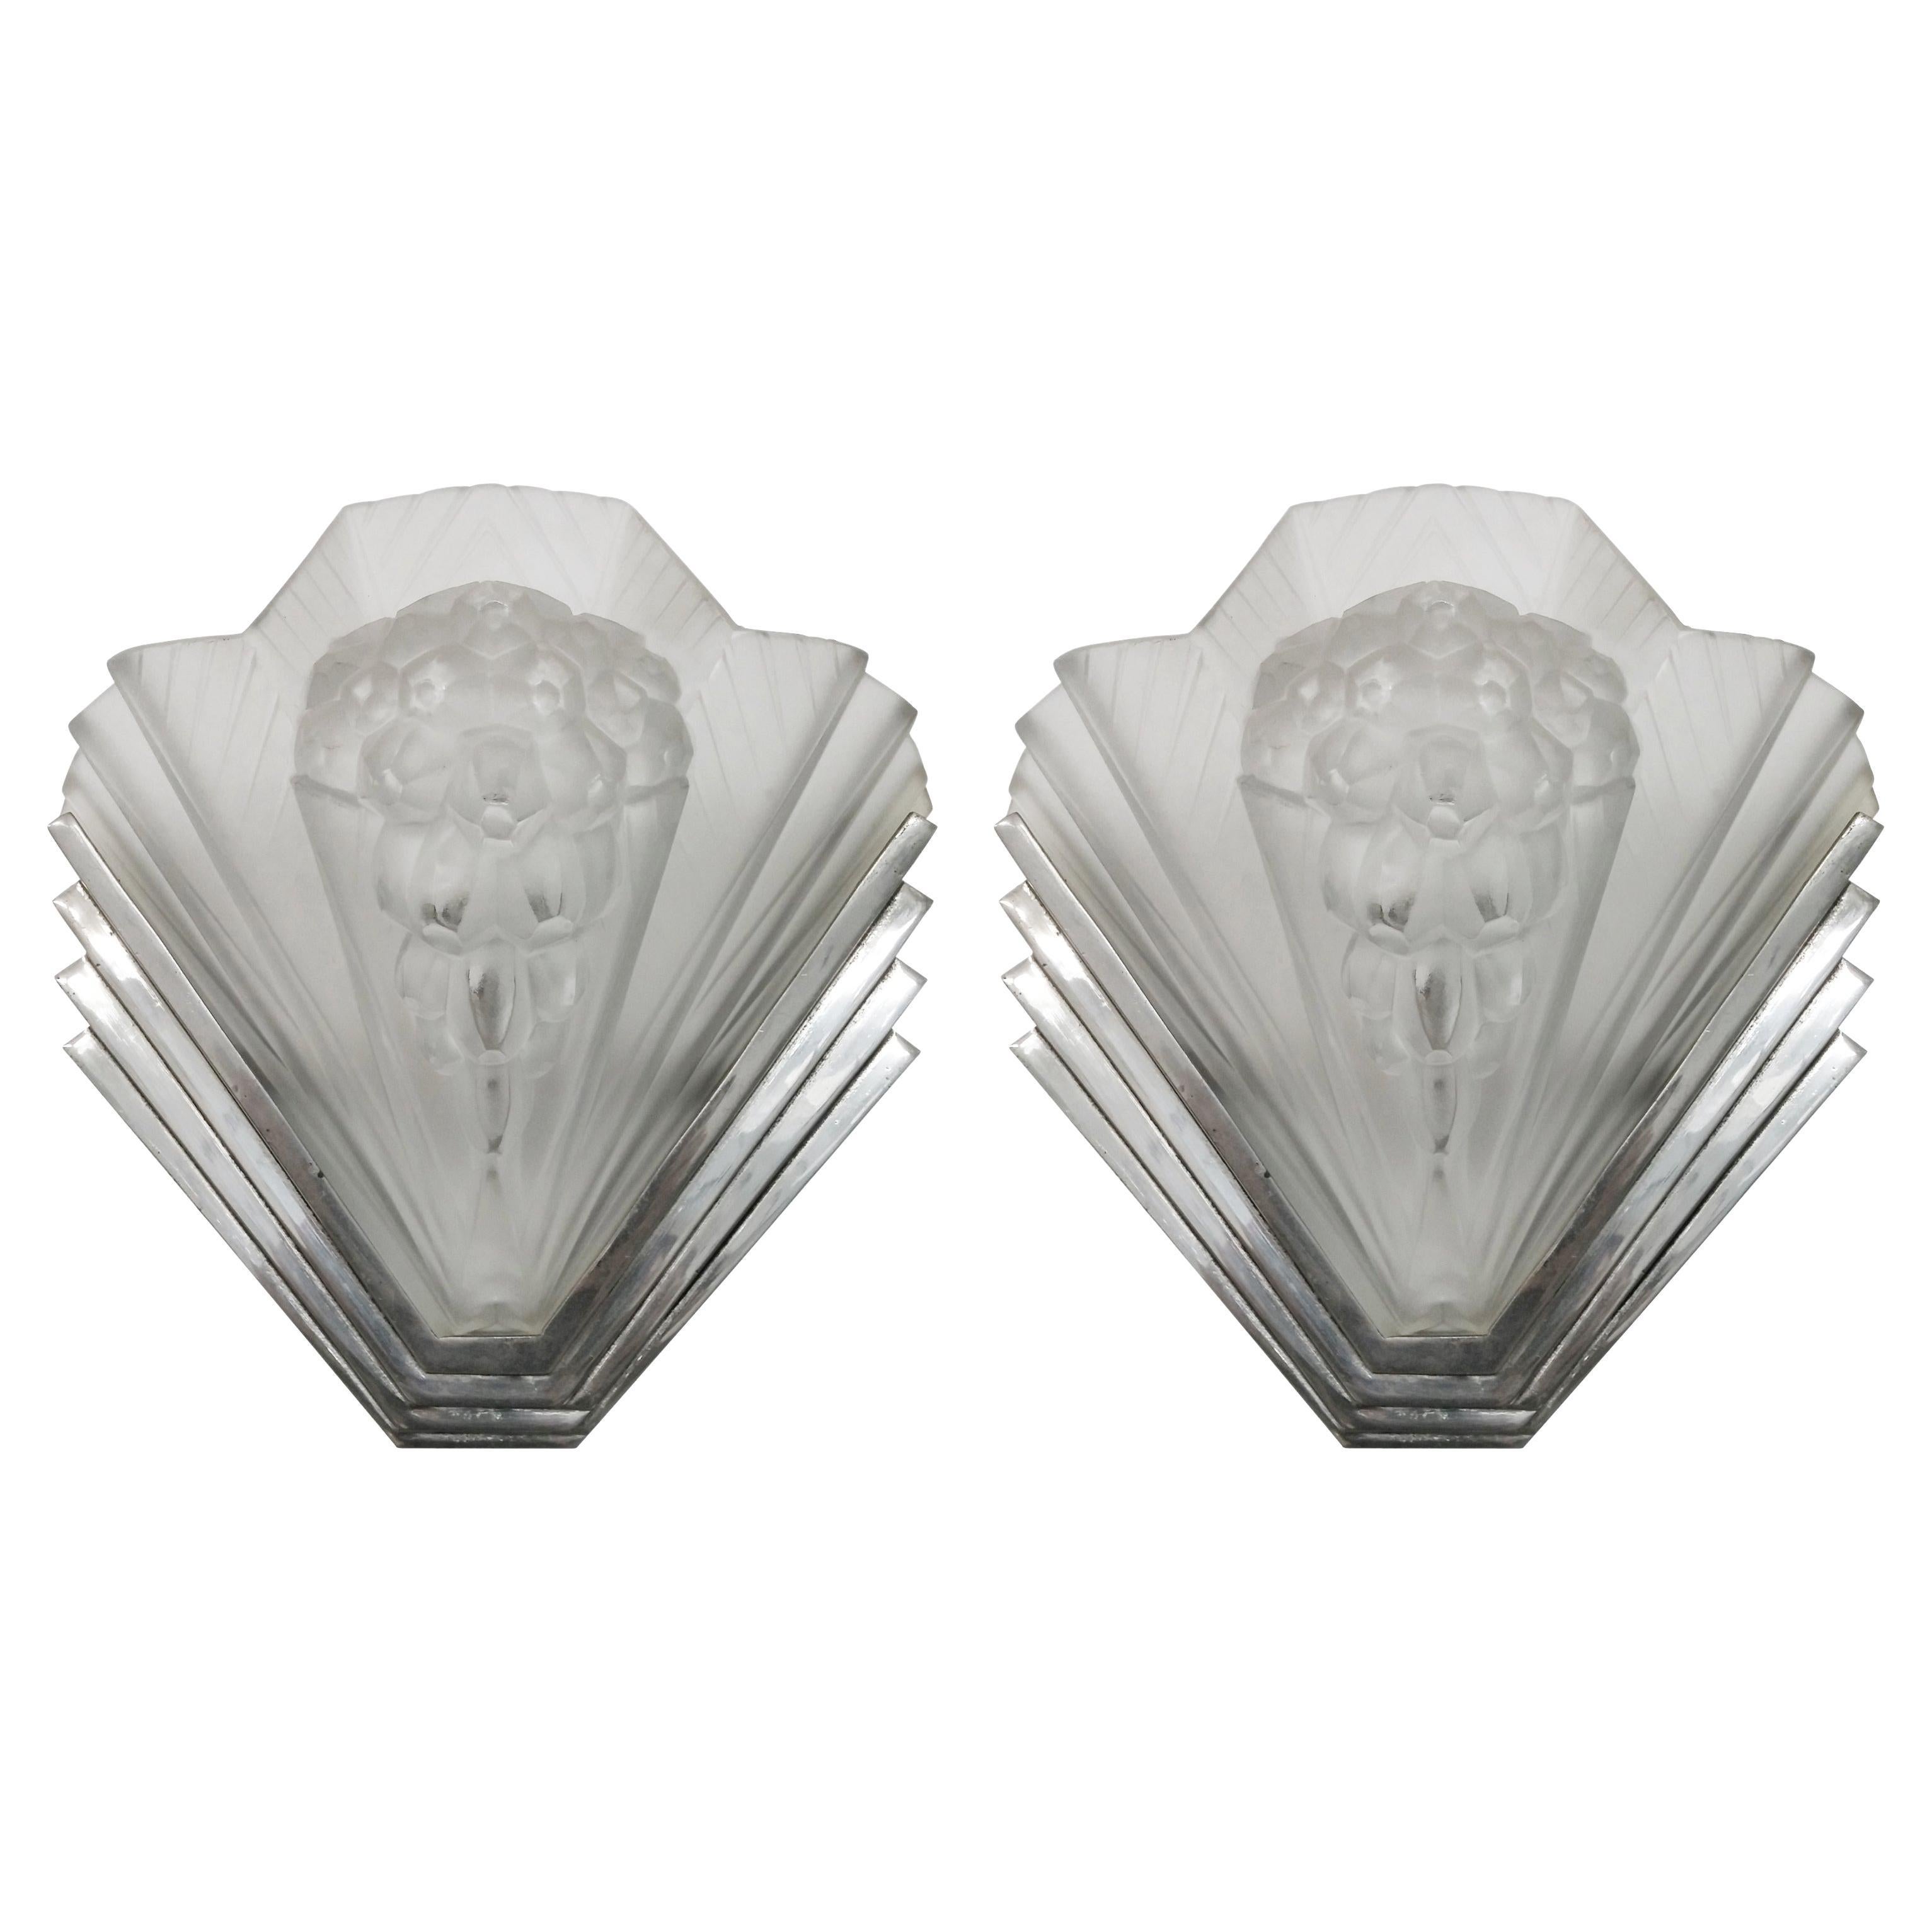 Pair of French Art Deco Wall Sconces Signed by Petitot (2 pairs available)